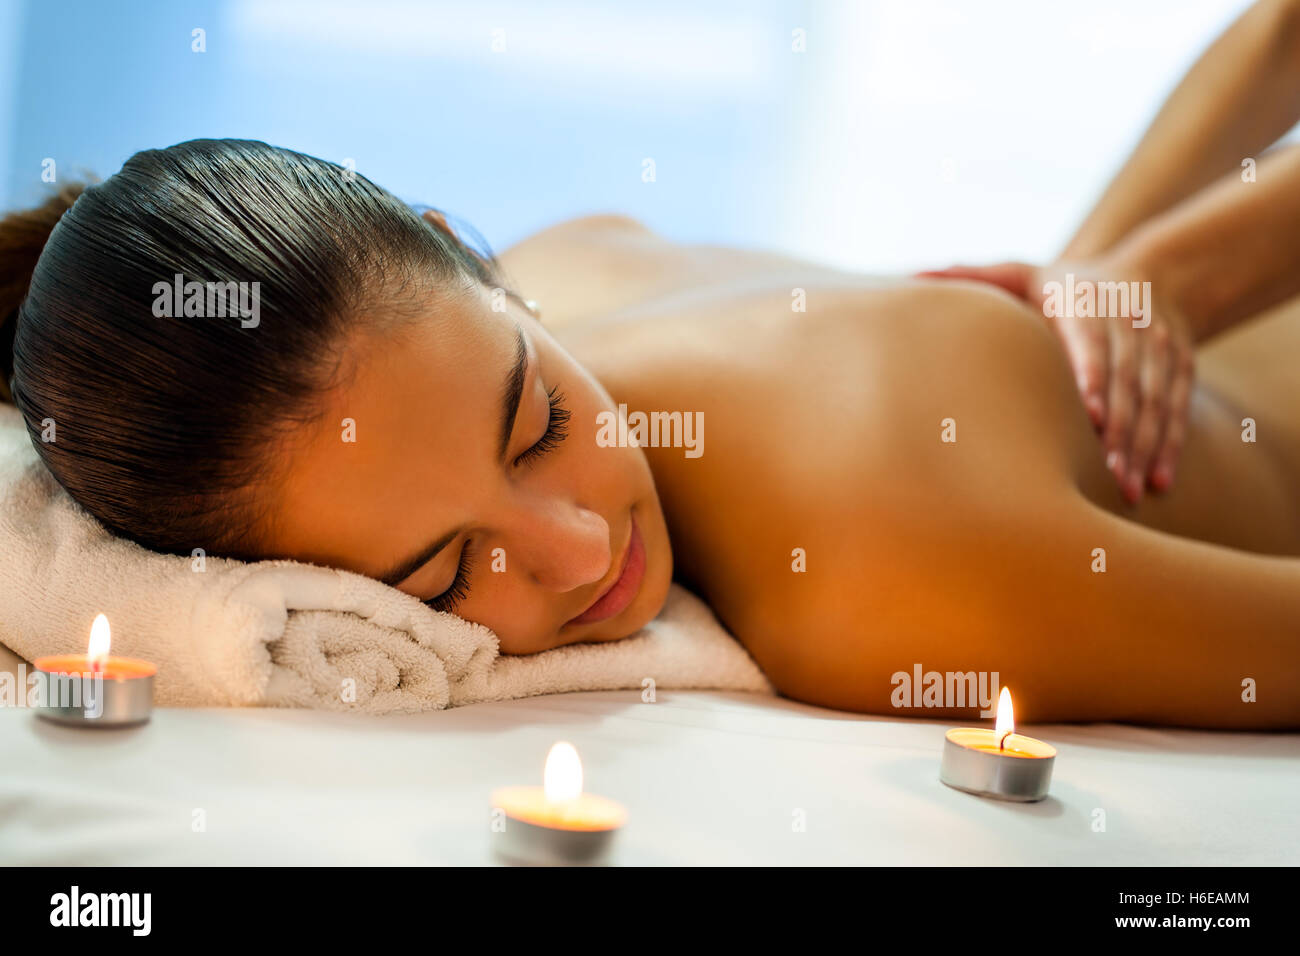 Close up portrait of attractive young woman having relaxing body spa treatment in dim candle light. Stock Photo